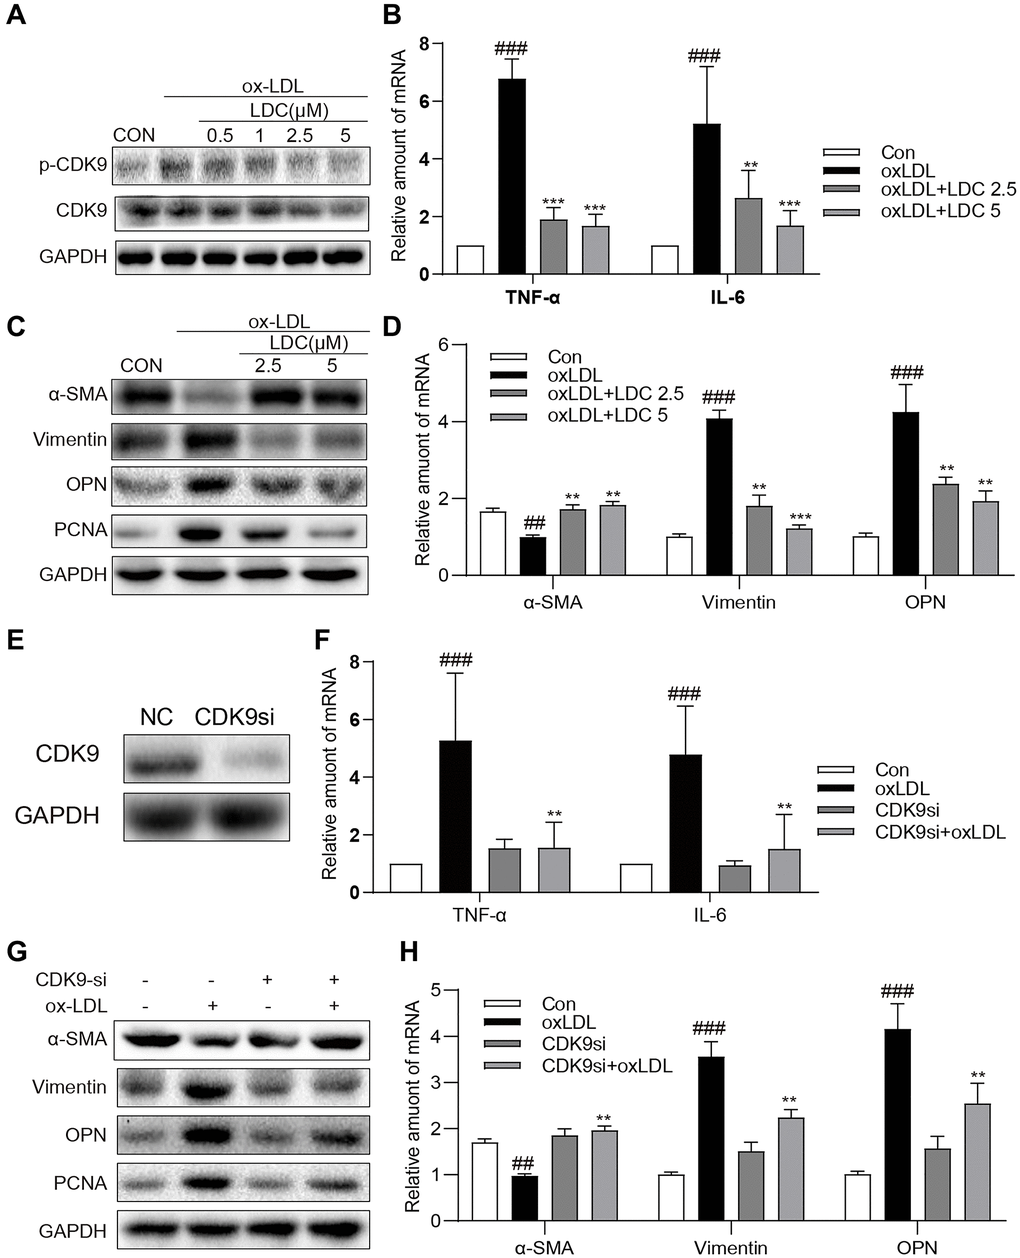 Inactivation of p-CDK9 by CDK9 inhibitor or CDK9-si prevented ox-LDL-induced inflammation and phenotype switch of VSMCs in vitro. (A) LDC000067 suppressed ox-LDL-induced activation of p-CDK9. VSMCs were pretreated with LDC000067 (indicated concentrations) for 1 h and then incubated with ox-LDL (50 μg/mL) for 2 h. The levels of p-CDK9 and CDK9 were detected by western blot. (B–D) VSMCs were treated with LDC000067 (2.5 or 5 μM) for 1 hour and then exposed to ox-LDL (50 μg/mL) for 6 h (in panels B), 24 h (in panels C) or 12 h ((in panels D). (B) The levels of TNF-α and IL-6 were detected using real-time qPCR assay. (C) Expressions of α-SMA, Vimentin, OPN and PCNA in the cultural medium were detected by western blot. (D) The mRNA levels of α-SMA, Vimentin, OPN were detected using real-time qPCR assay (n = 3 ##P ###P *P **P ***P E–H) VSMCs were transfected with siRNA against CDK9 and then incubated with ox-LDL (50 μg/mL) for 6 h (in panels G), 24 h (in panels H) or 12 h ((in panels H). (E) VSMCs were transfected with siRNA against CDK9 for 6 h and then detected expression of CDK9 by western blot. (F) The level of TNF-α and IL-6 were detected using real-time qPCR assay. (G) Expressions of α-SMA, Vimentin, OPN and PCNA in the cultural medium were detected by western blot. (H) The mRNA level of α-SMA, Vimentin, OPN were detected using real-time qPCR assay (n = 3; ##P ###P *P **P 